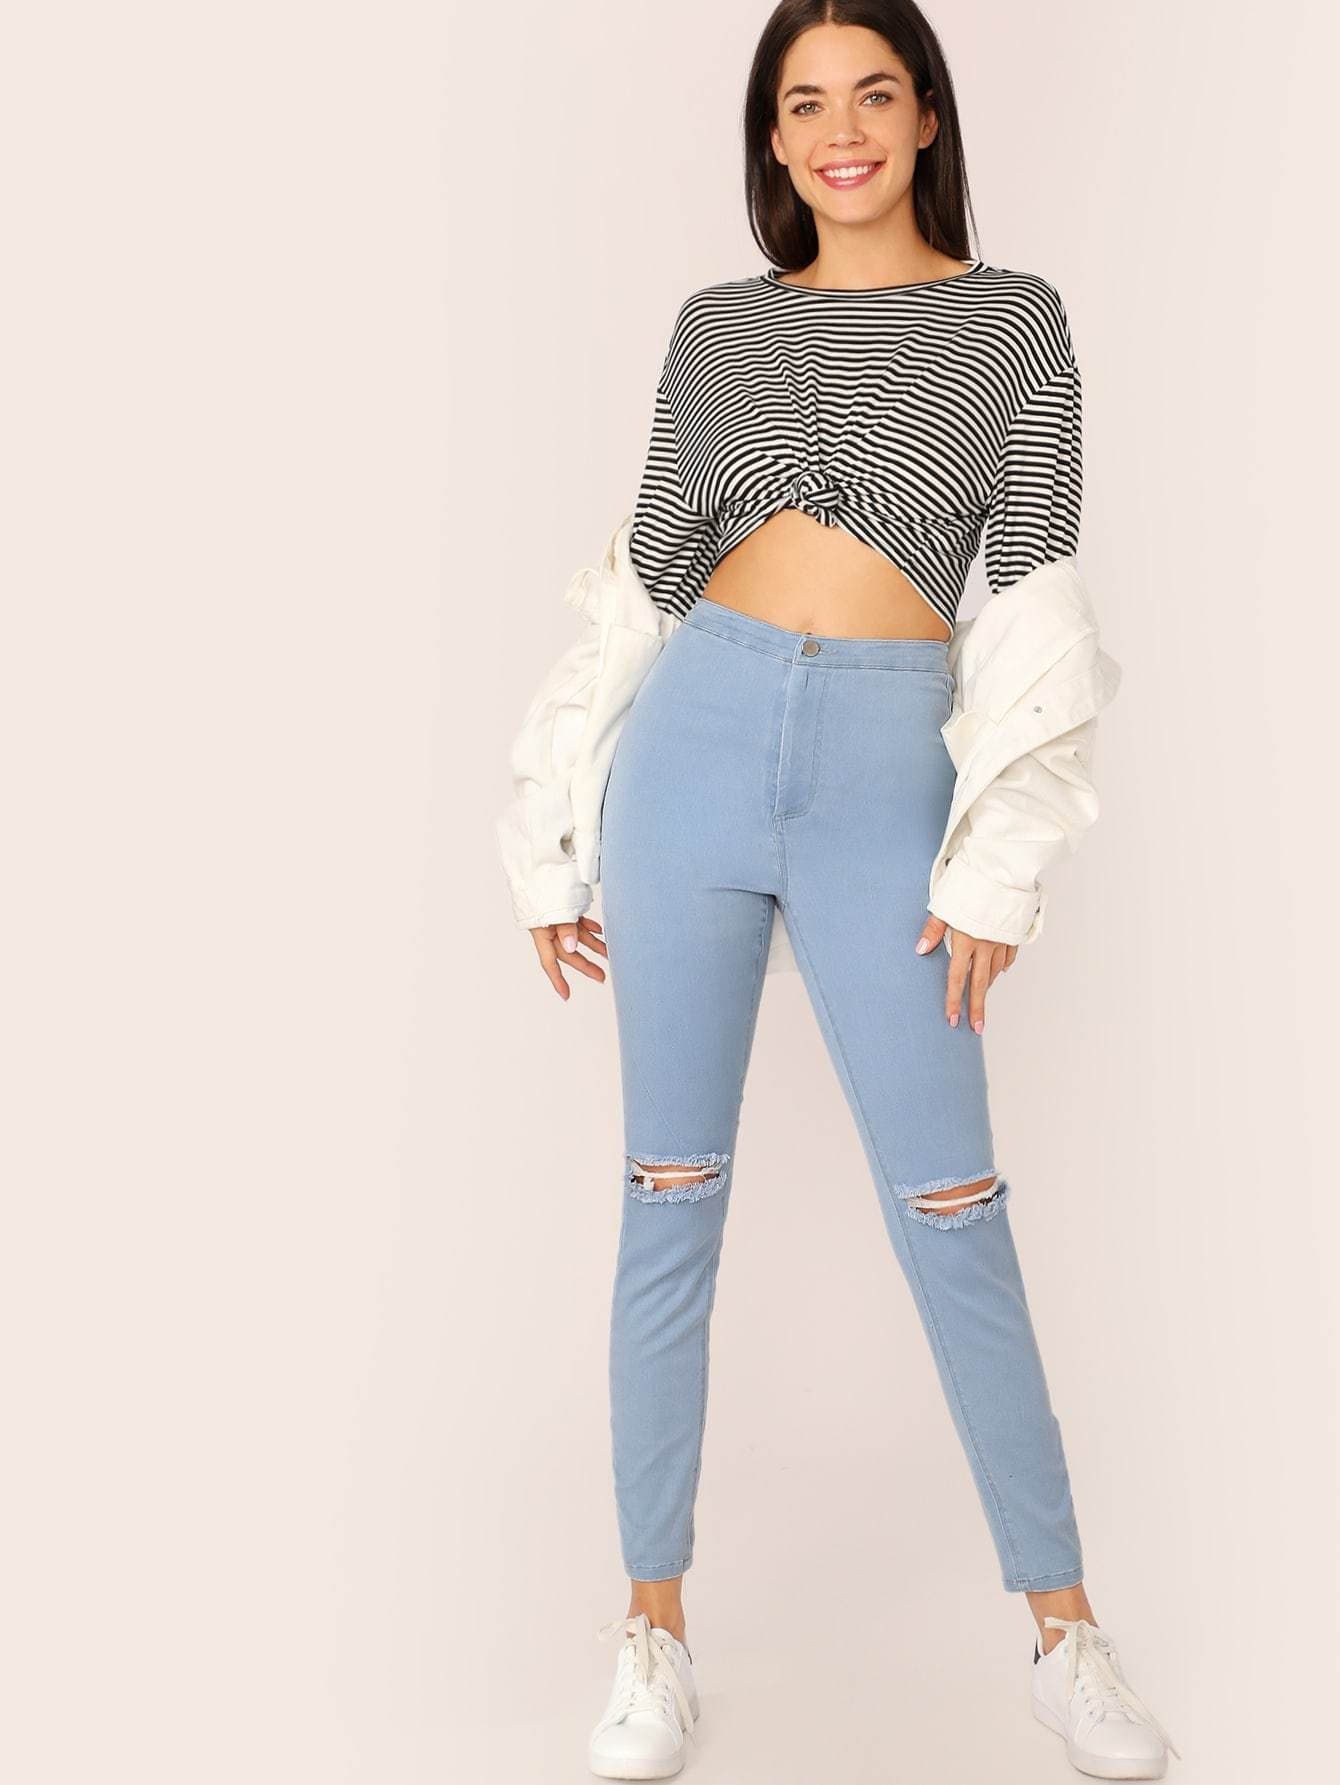 Blue Light Wash Ripped Skinny Crop Jeans